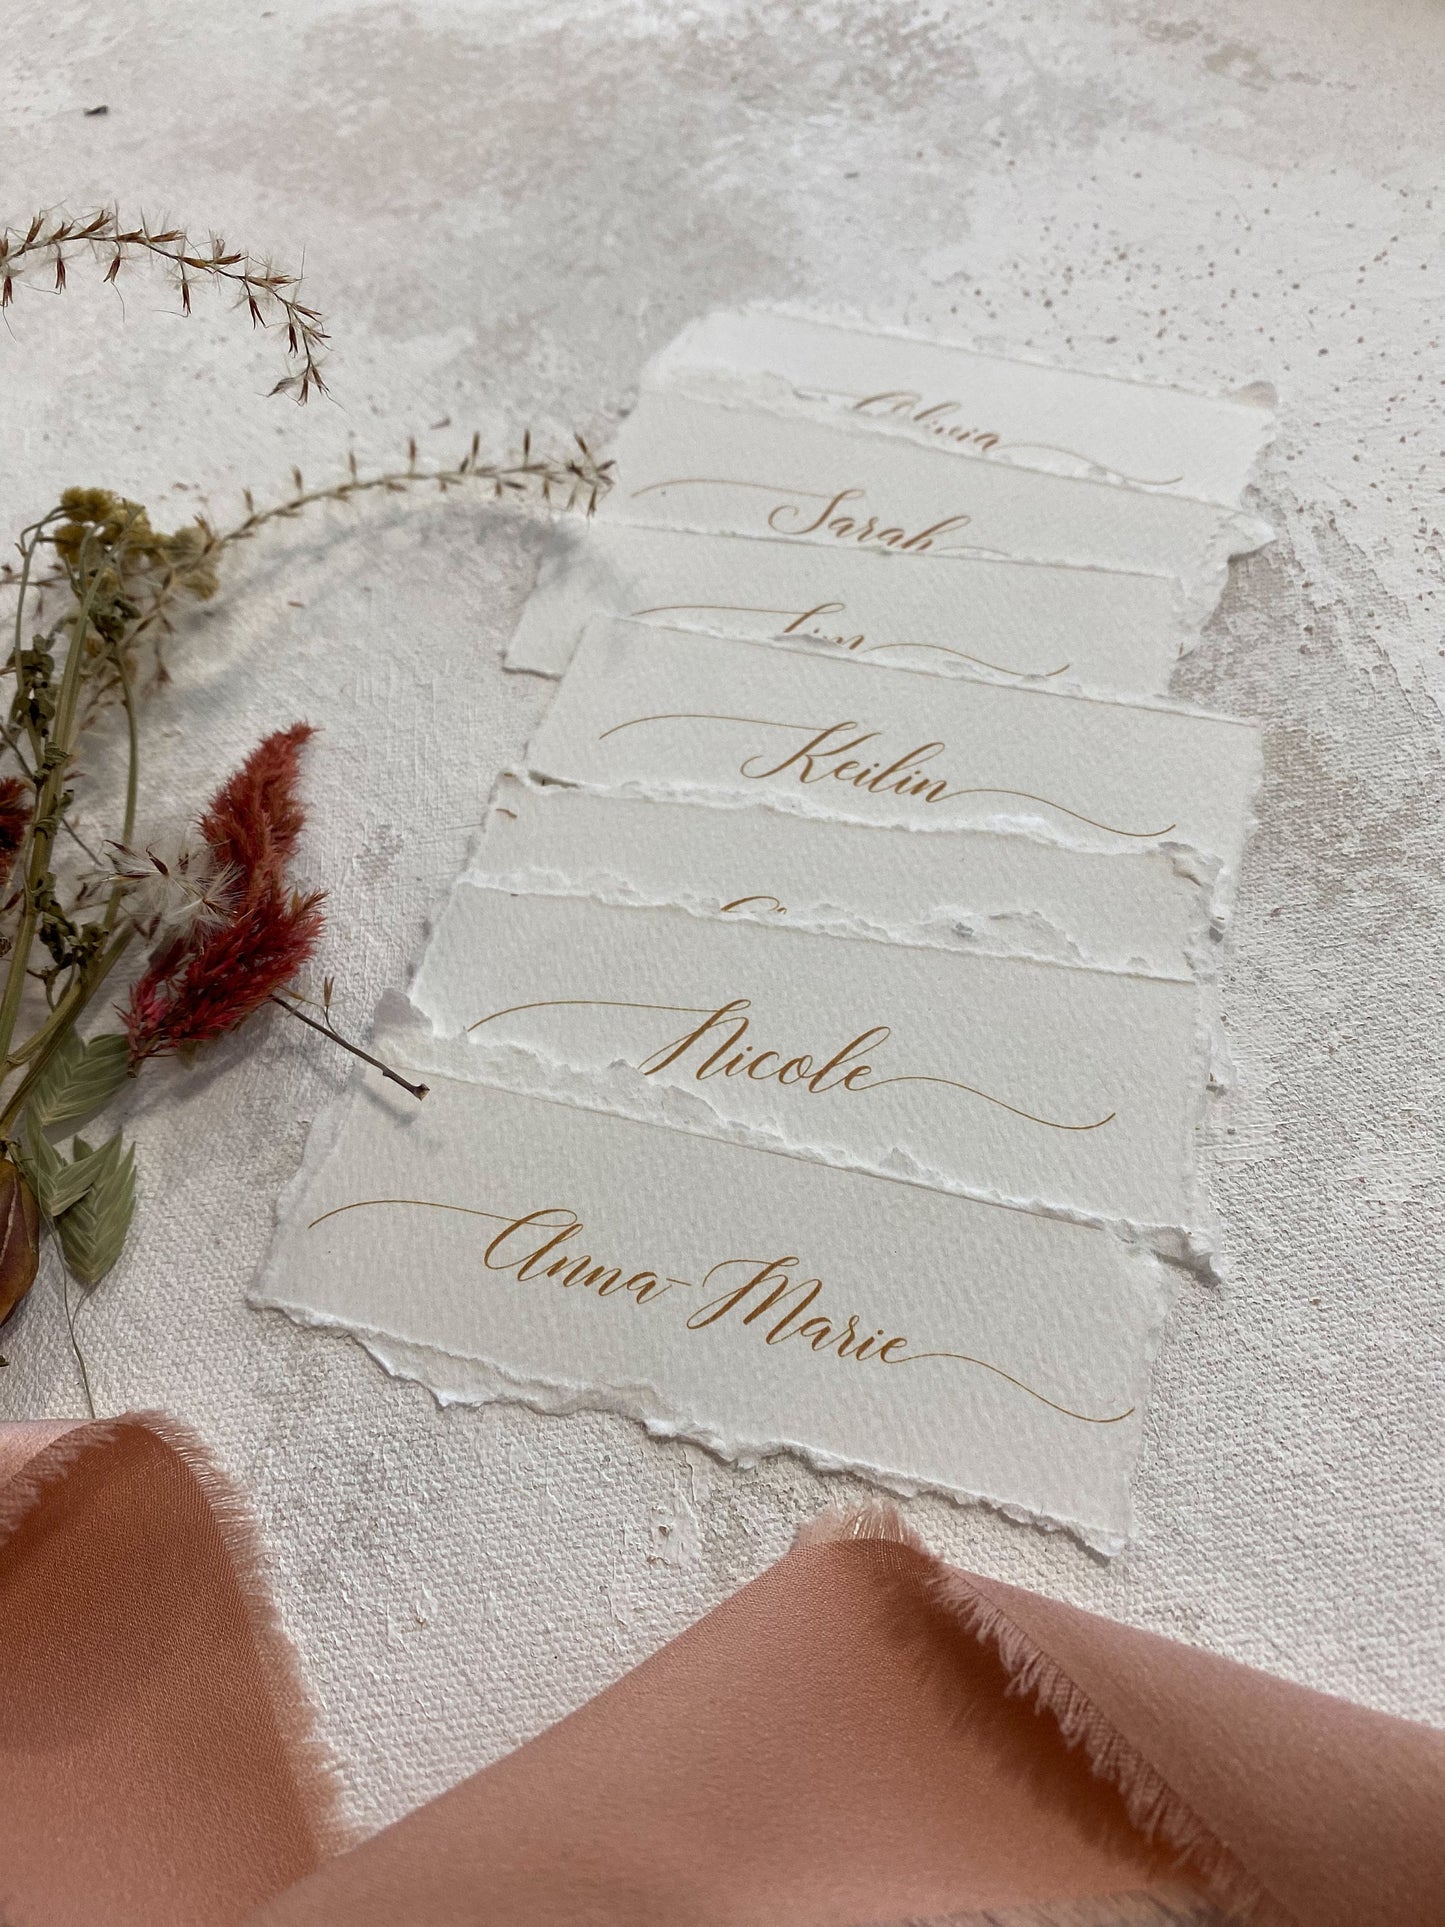 Name Tags | Printed Name Cards | Menu Name Tags | Modern Deckle Edge Place Cards | Wedding Place Cards |  Style 211